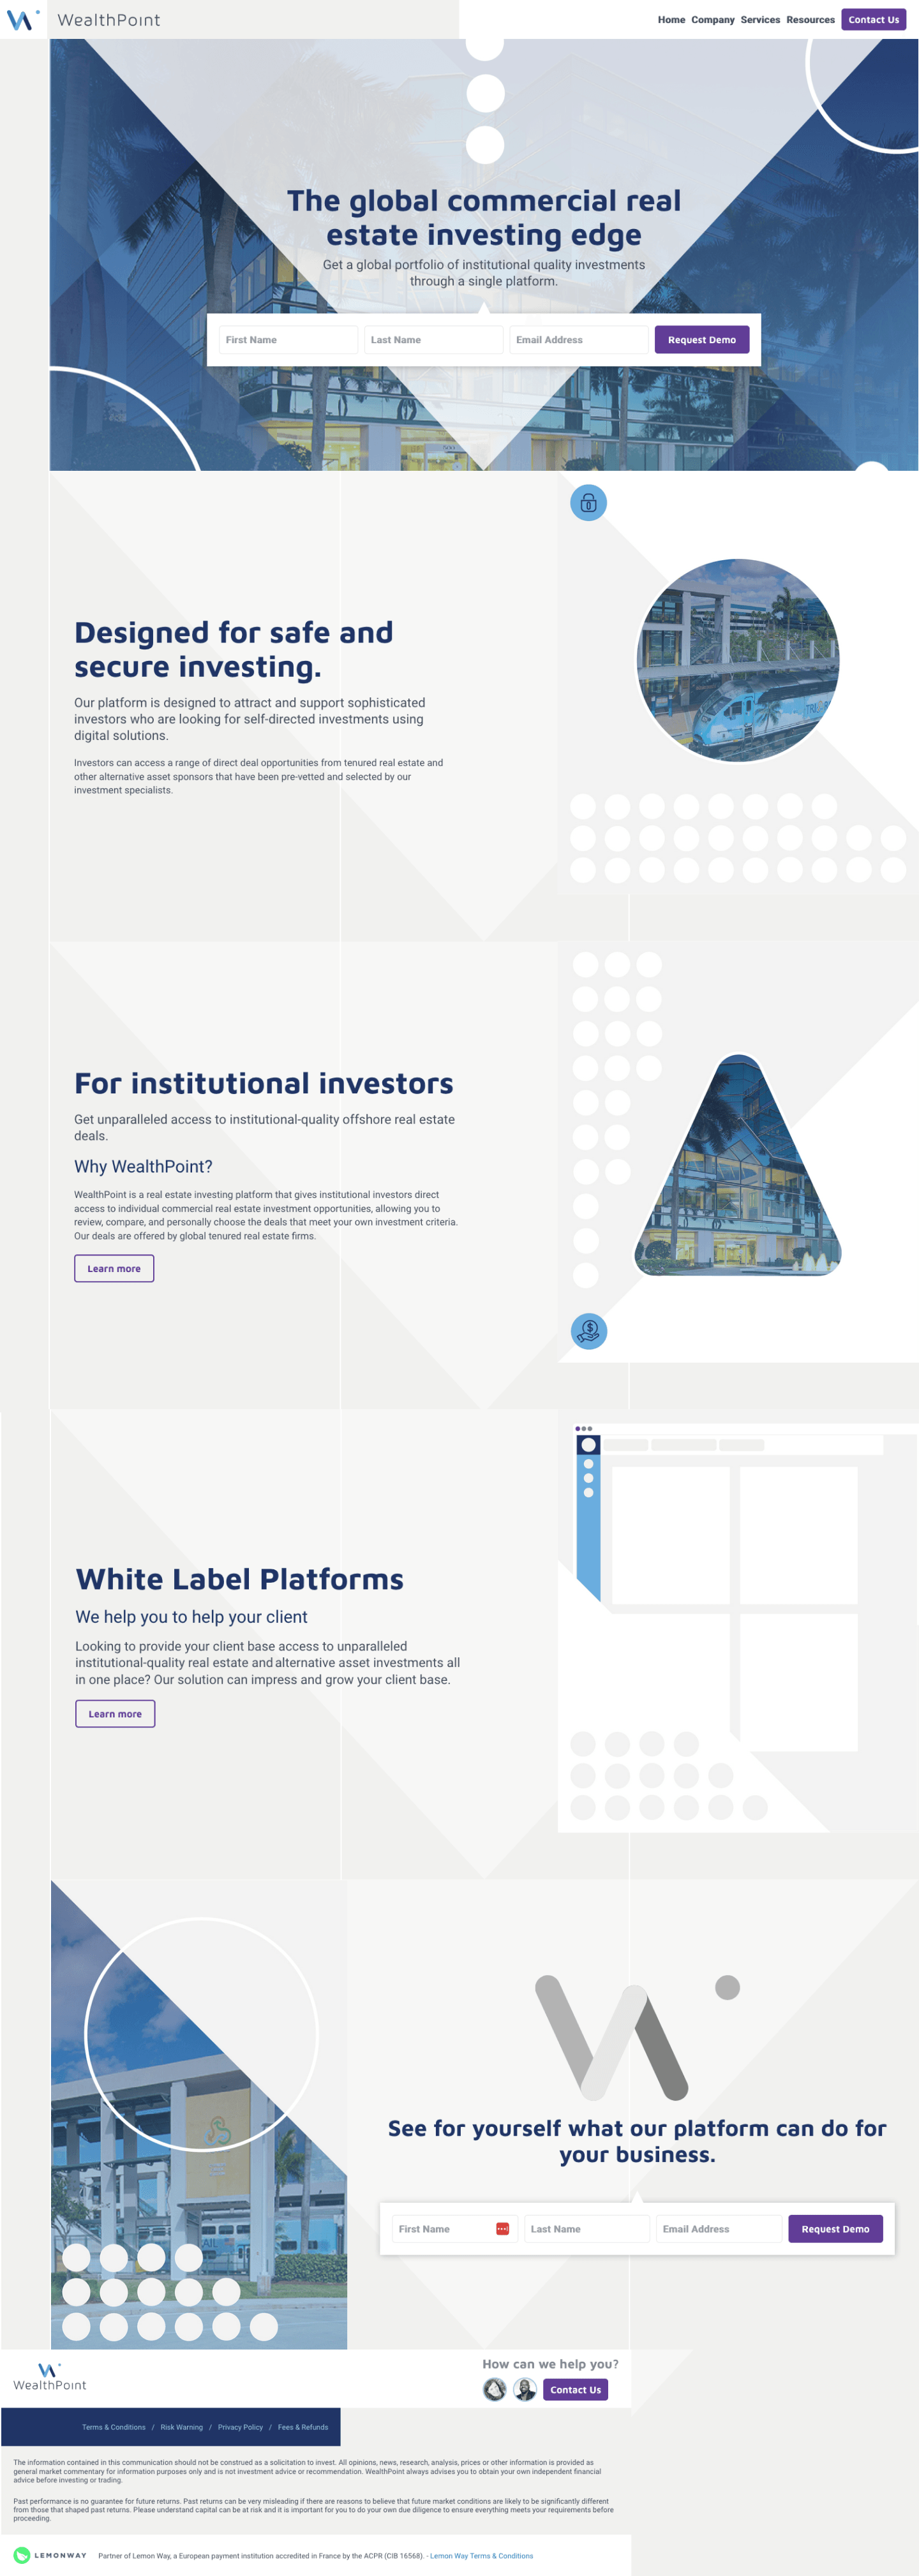 WealthPoint Homepage - By Adrian Kirsten